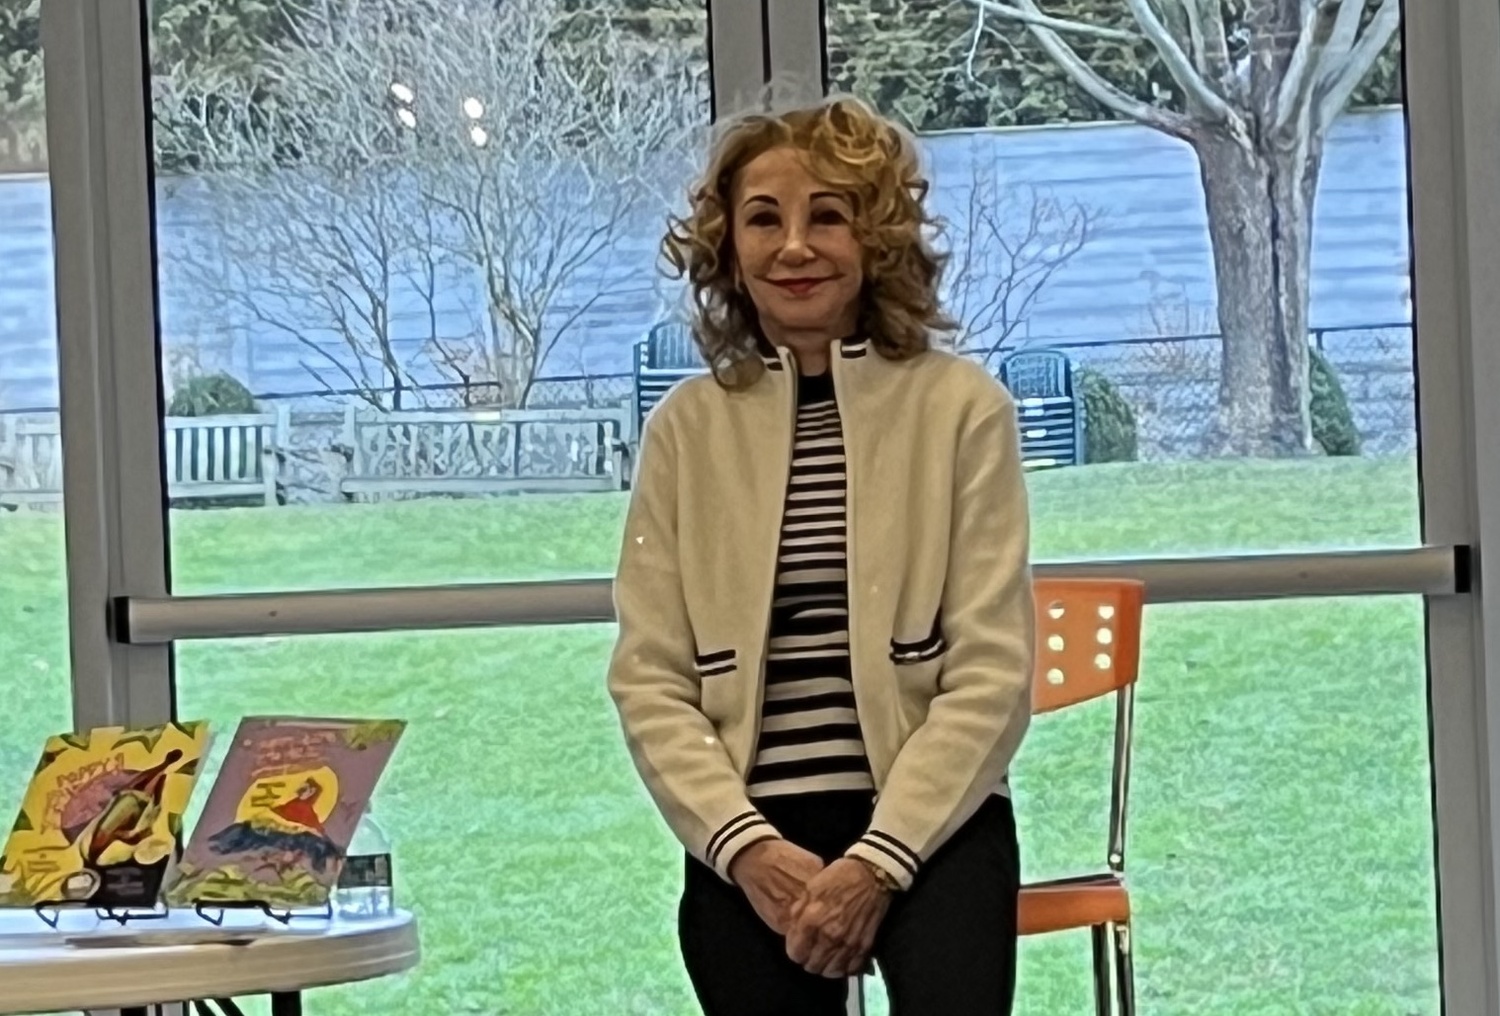 Author Madelyn Simon at a recent book event at Hampton Library. COURTESY THE AUTHOR